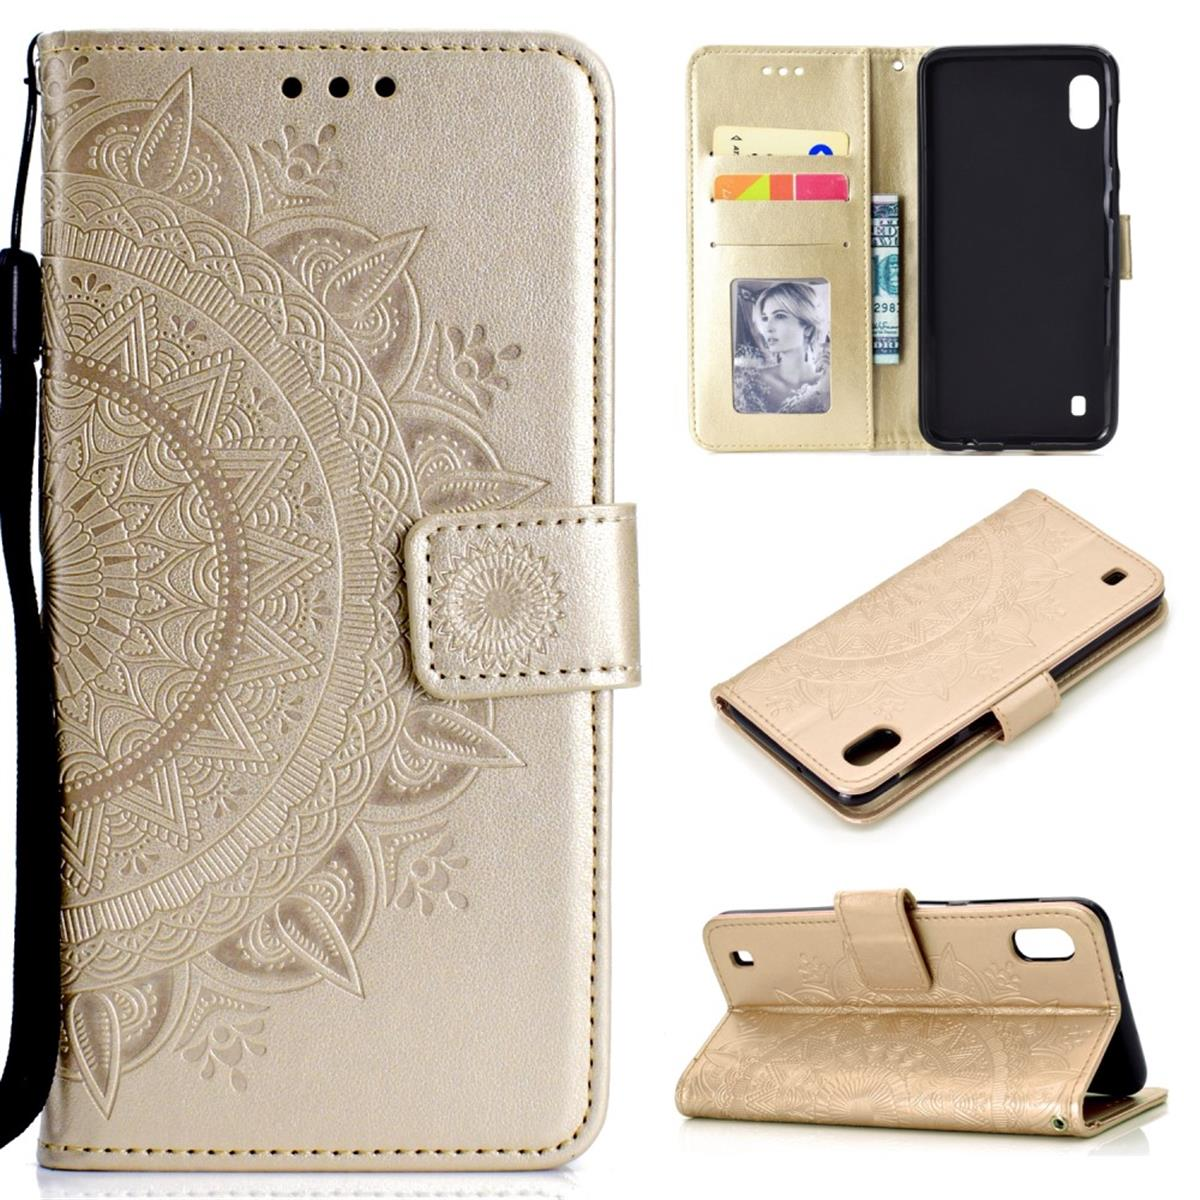 COVERKINGZ Klapphülle mit Samsung, Mandala Bookcover, Galaxy Muster, Gold A10